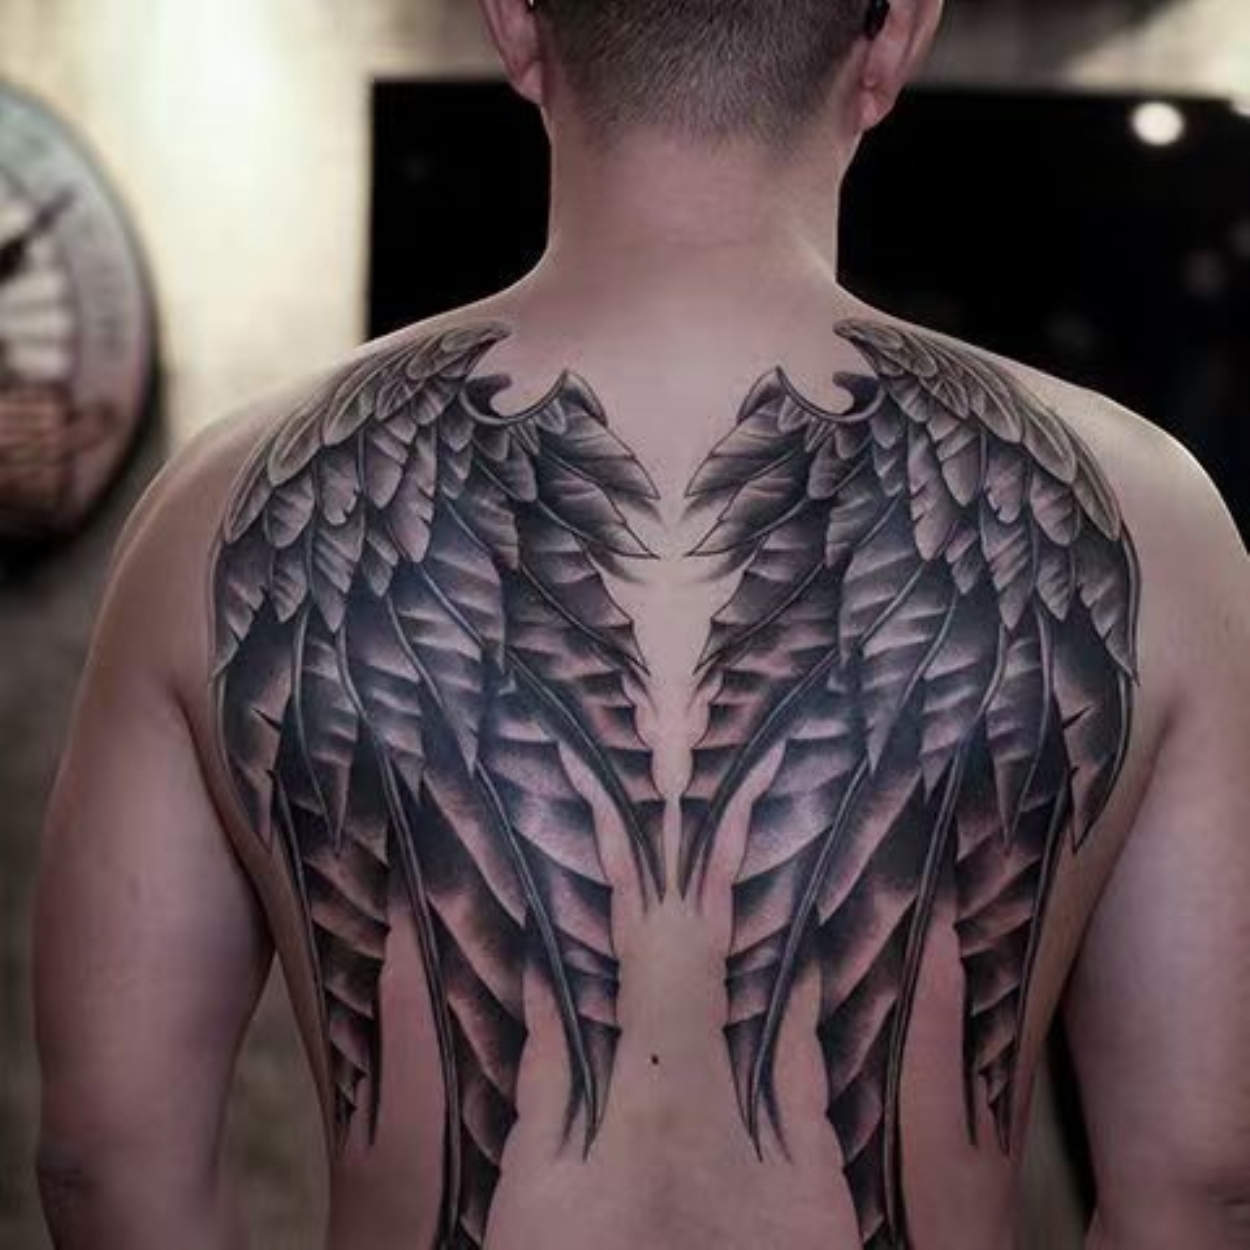 Wings Large Temporary Tattoo for Cosplaying - Etsy